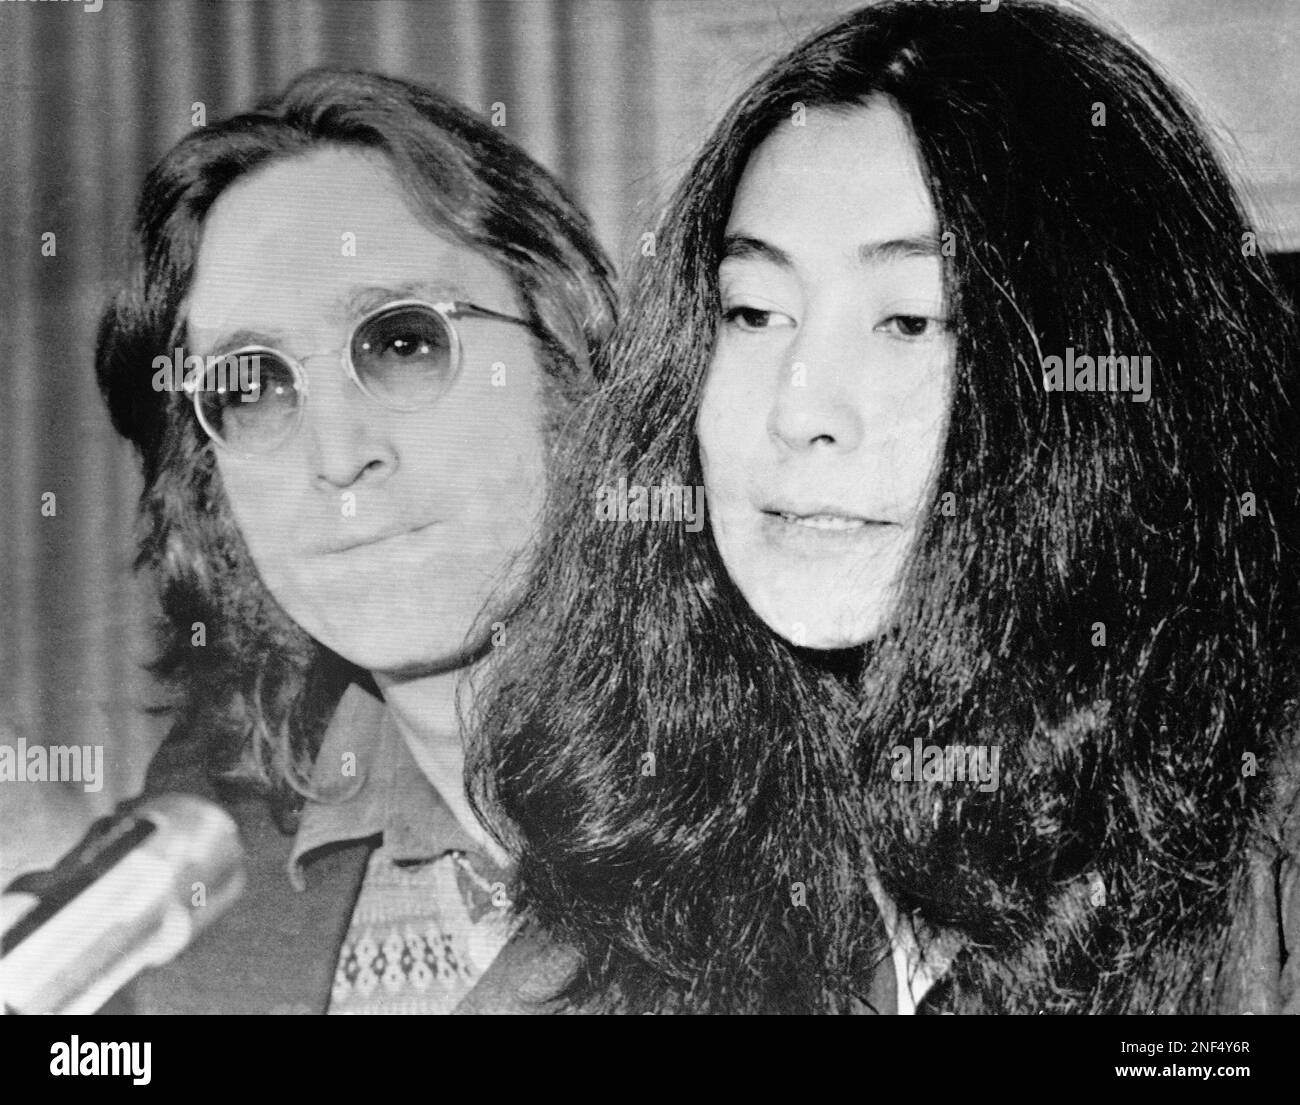 John Lennon and with his wife Yoko Ono shown April 2, 1973 in New York. They are answering questions at a news conference after a deportation hearing. (AP Photo/Jim Wells) Stock Photo